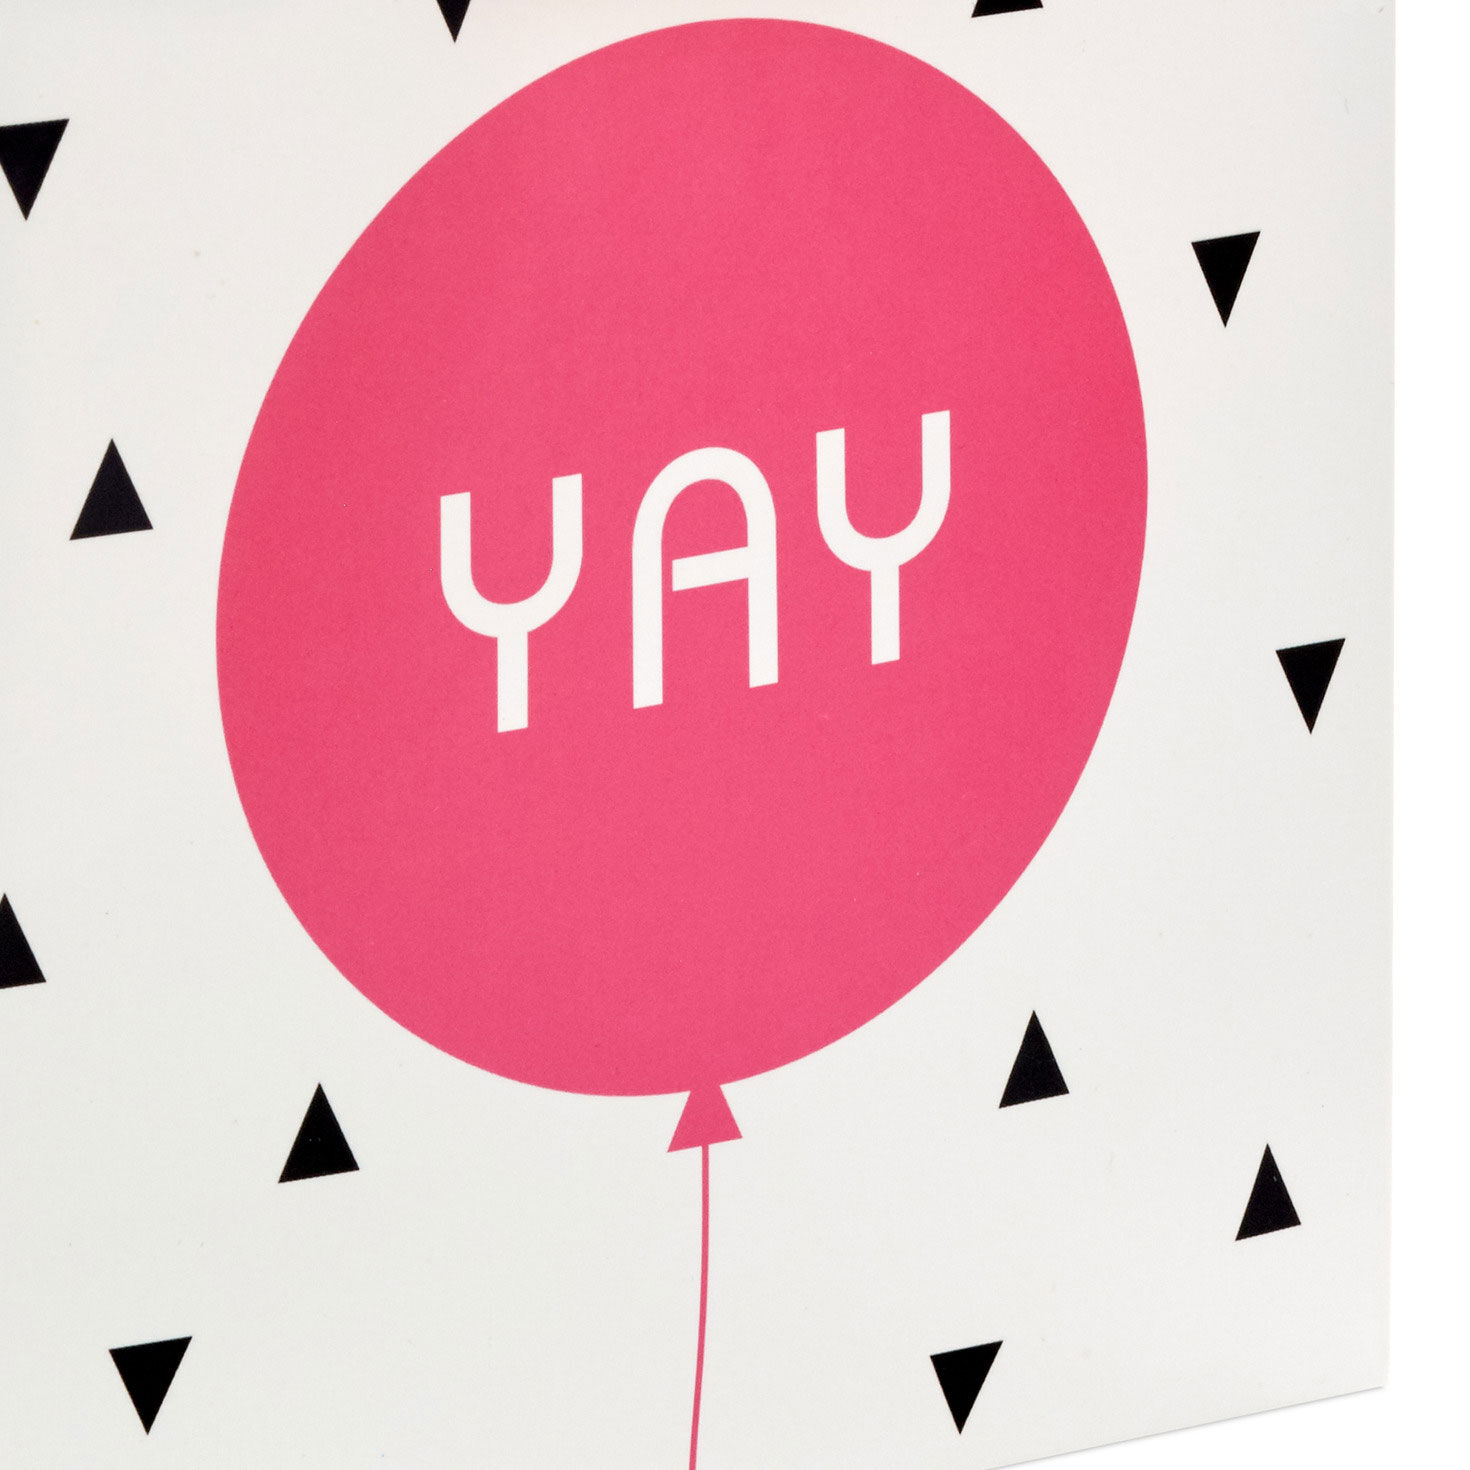 6.5" Yay Pink Balloon Small Gift Bag for only USD 2.49 | Hallmark